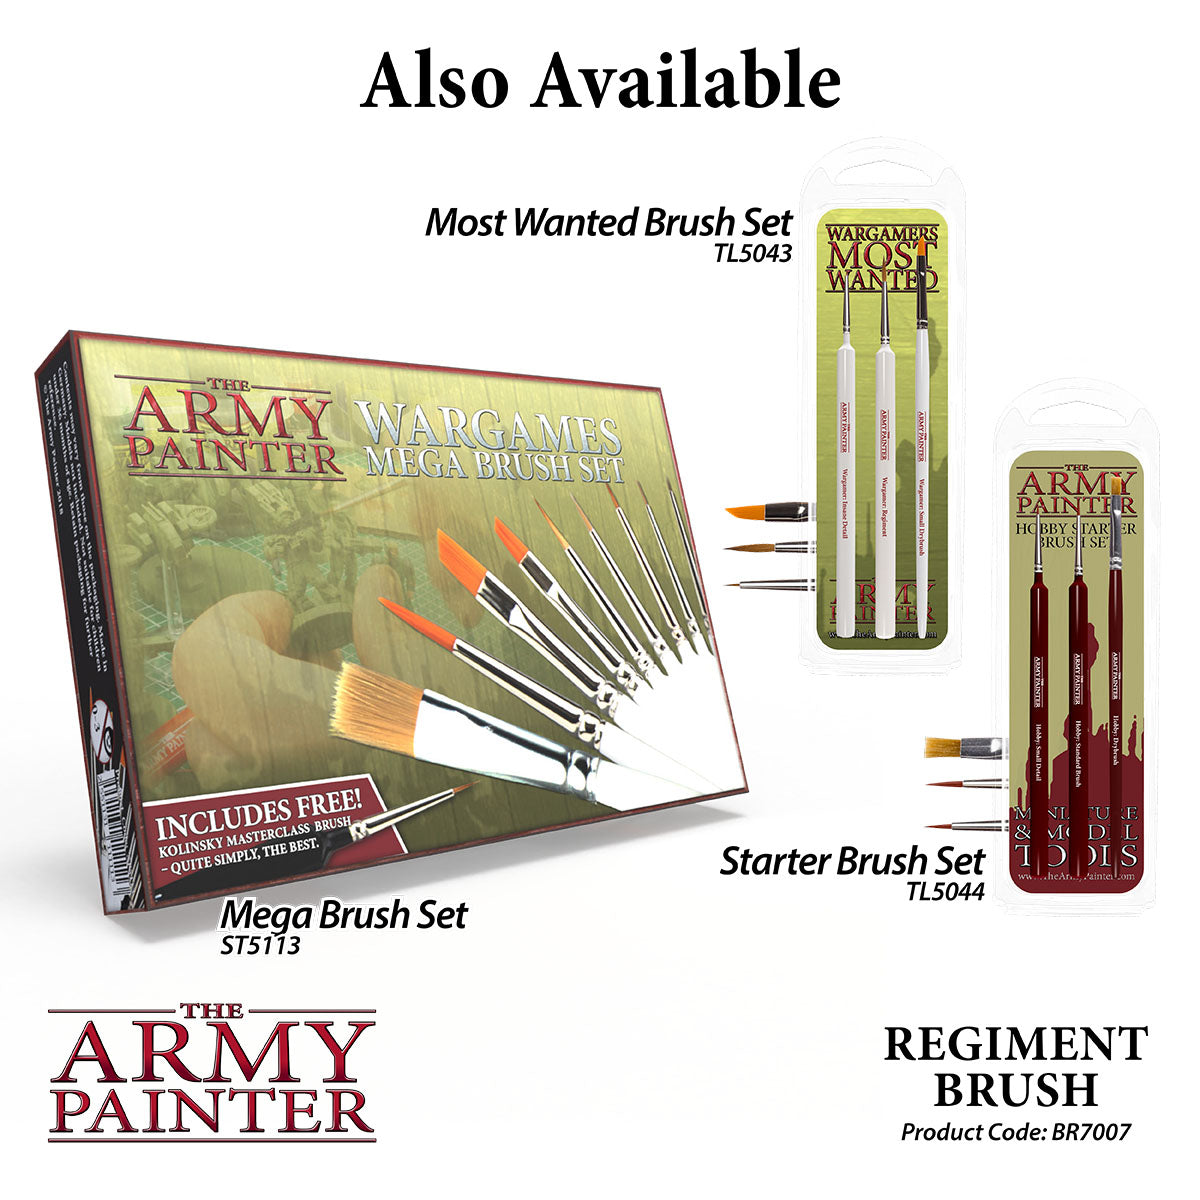 The Army Painter - Hobby and WarGamer Brushes - all brushes and